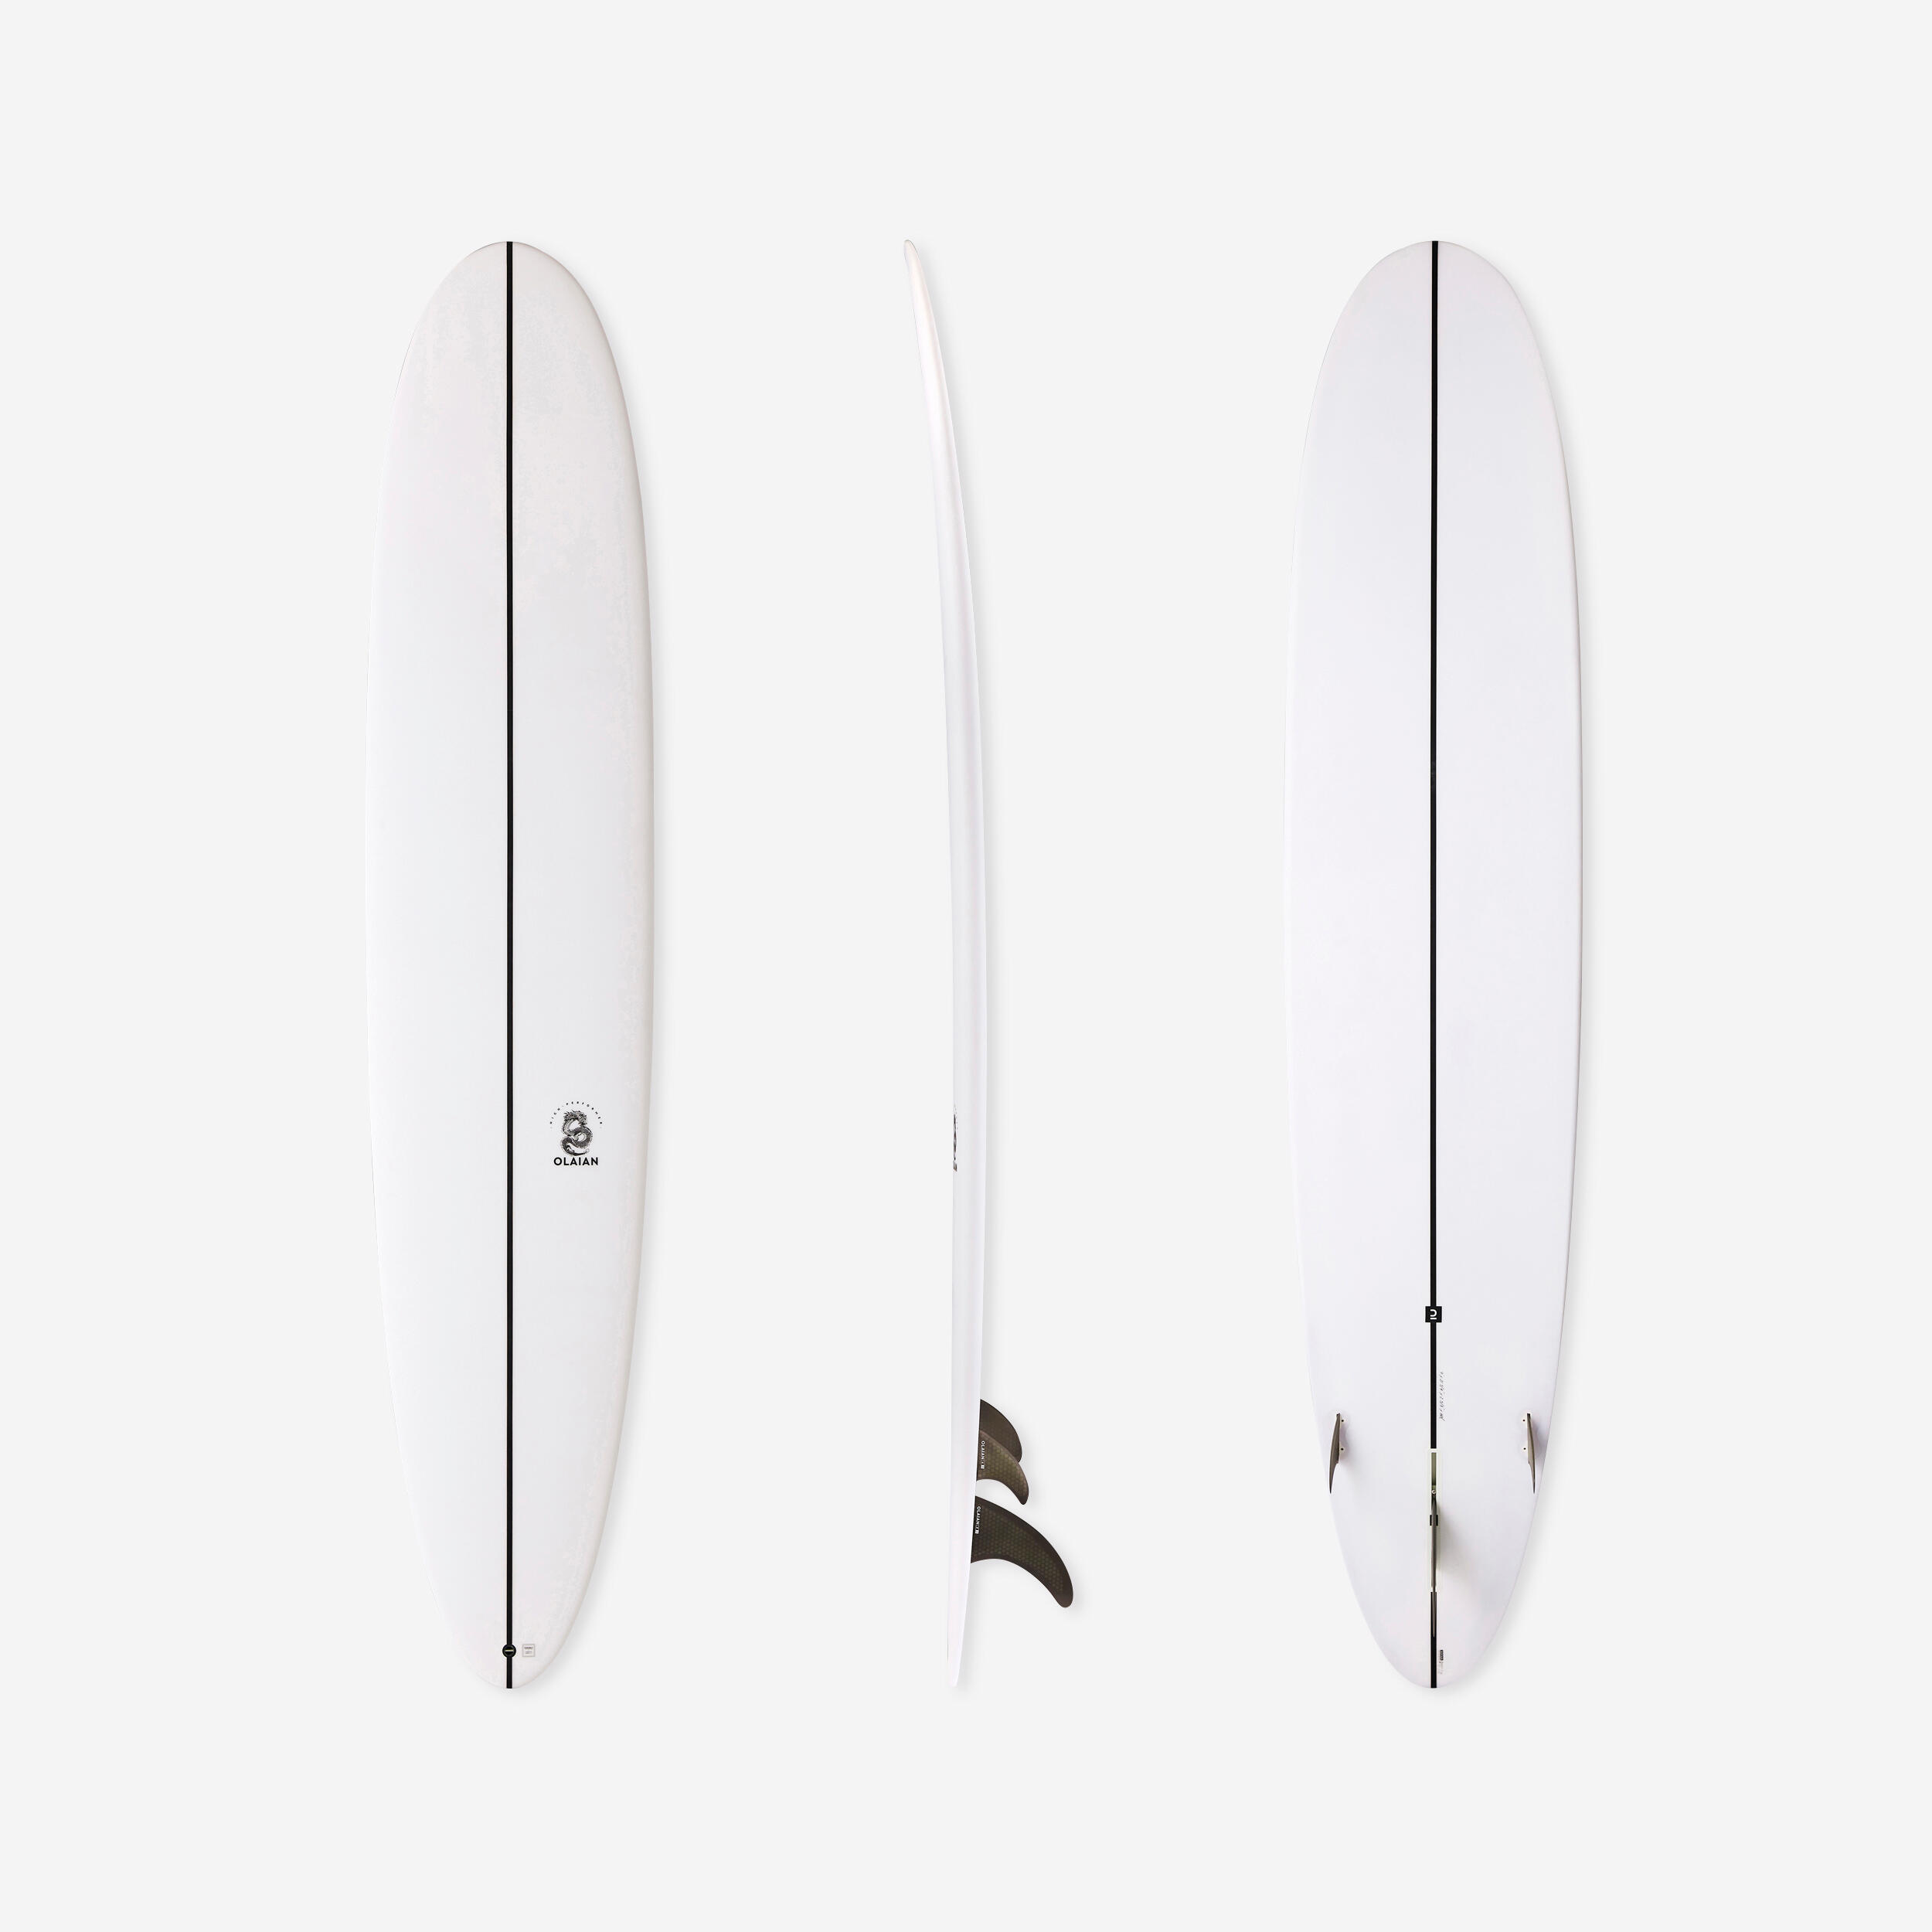 LONGBOARD 900 9' Performance 60 L. Comes with 2+1 setup 8" central fin. 1/14